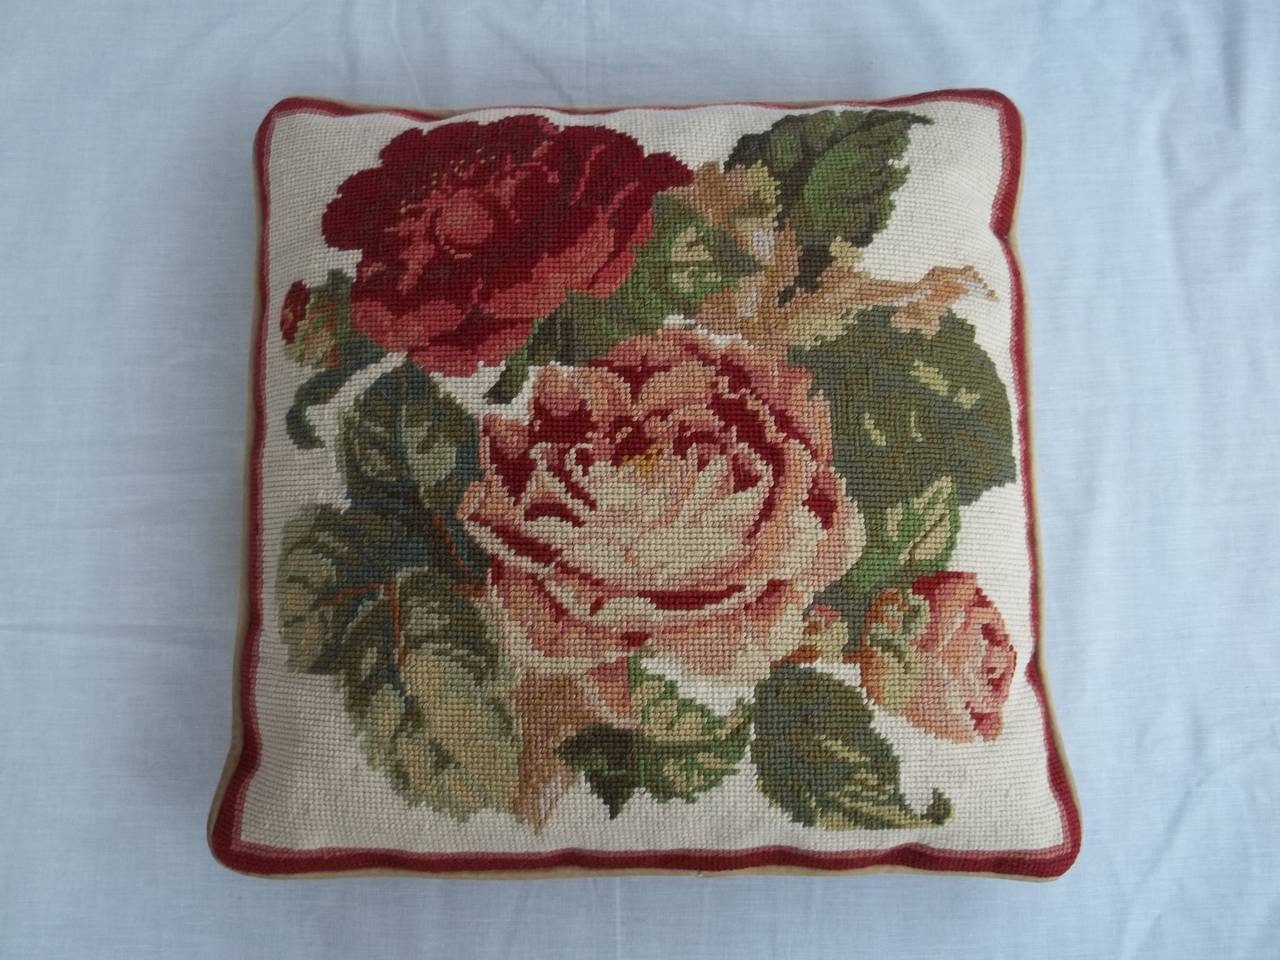 A good Needlepoint Cushion with a floral theme showing pink and red roses among green leaves on a light cream background.

It has a cream chenille backing with a zip to enable the stuffing to be removed.

There has been a small repair to the